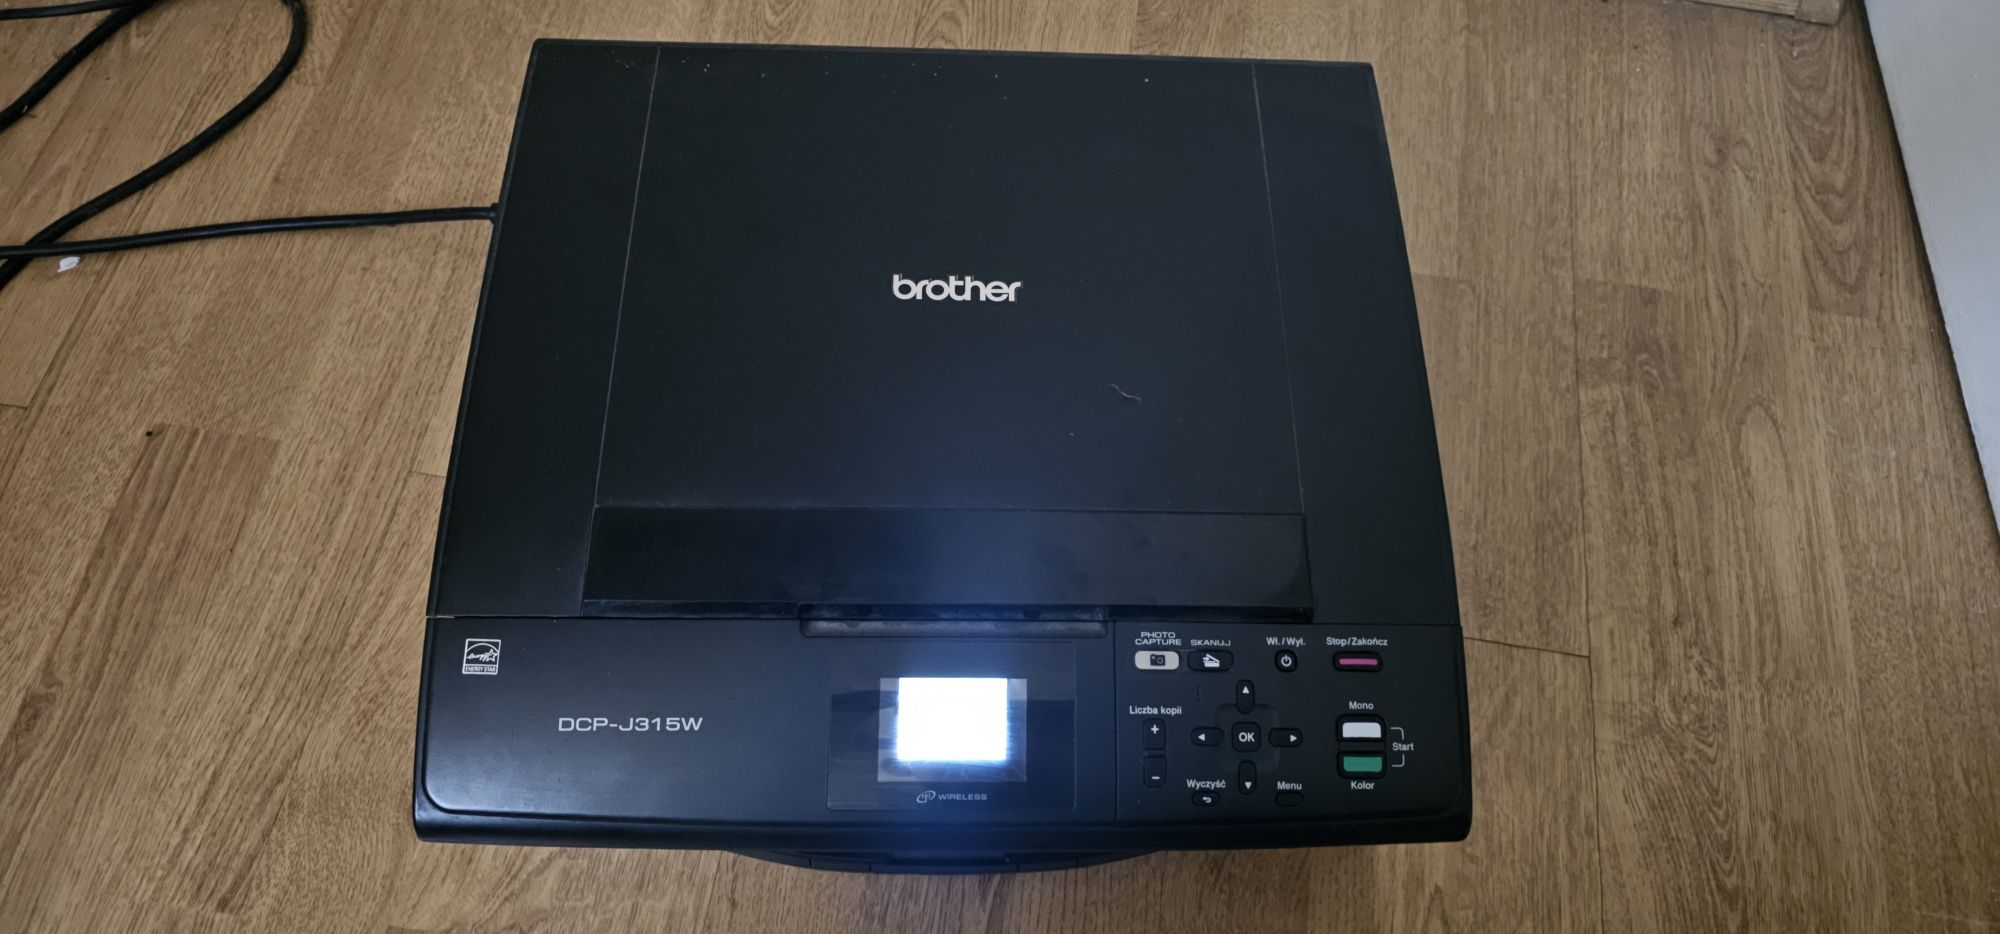 Brother dcp-315w